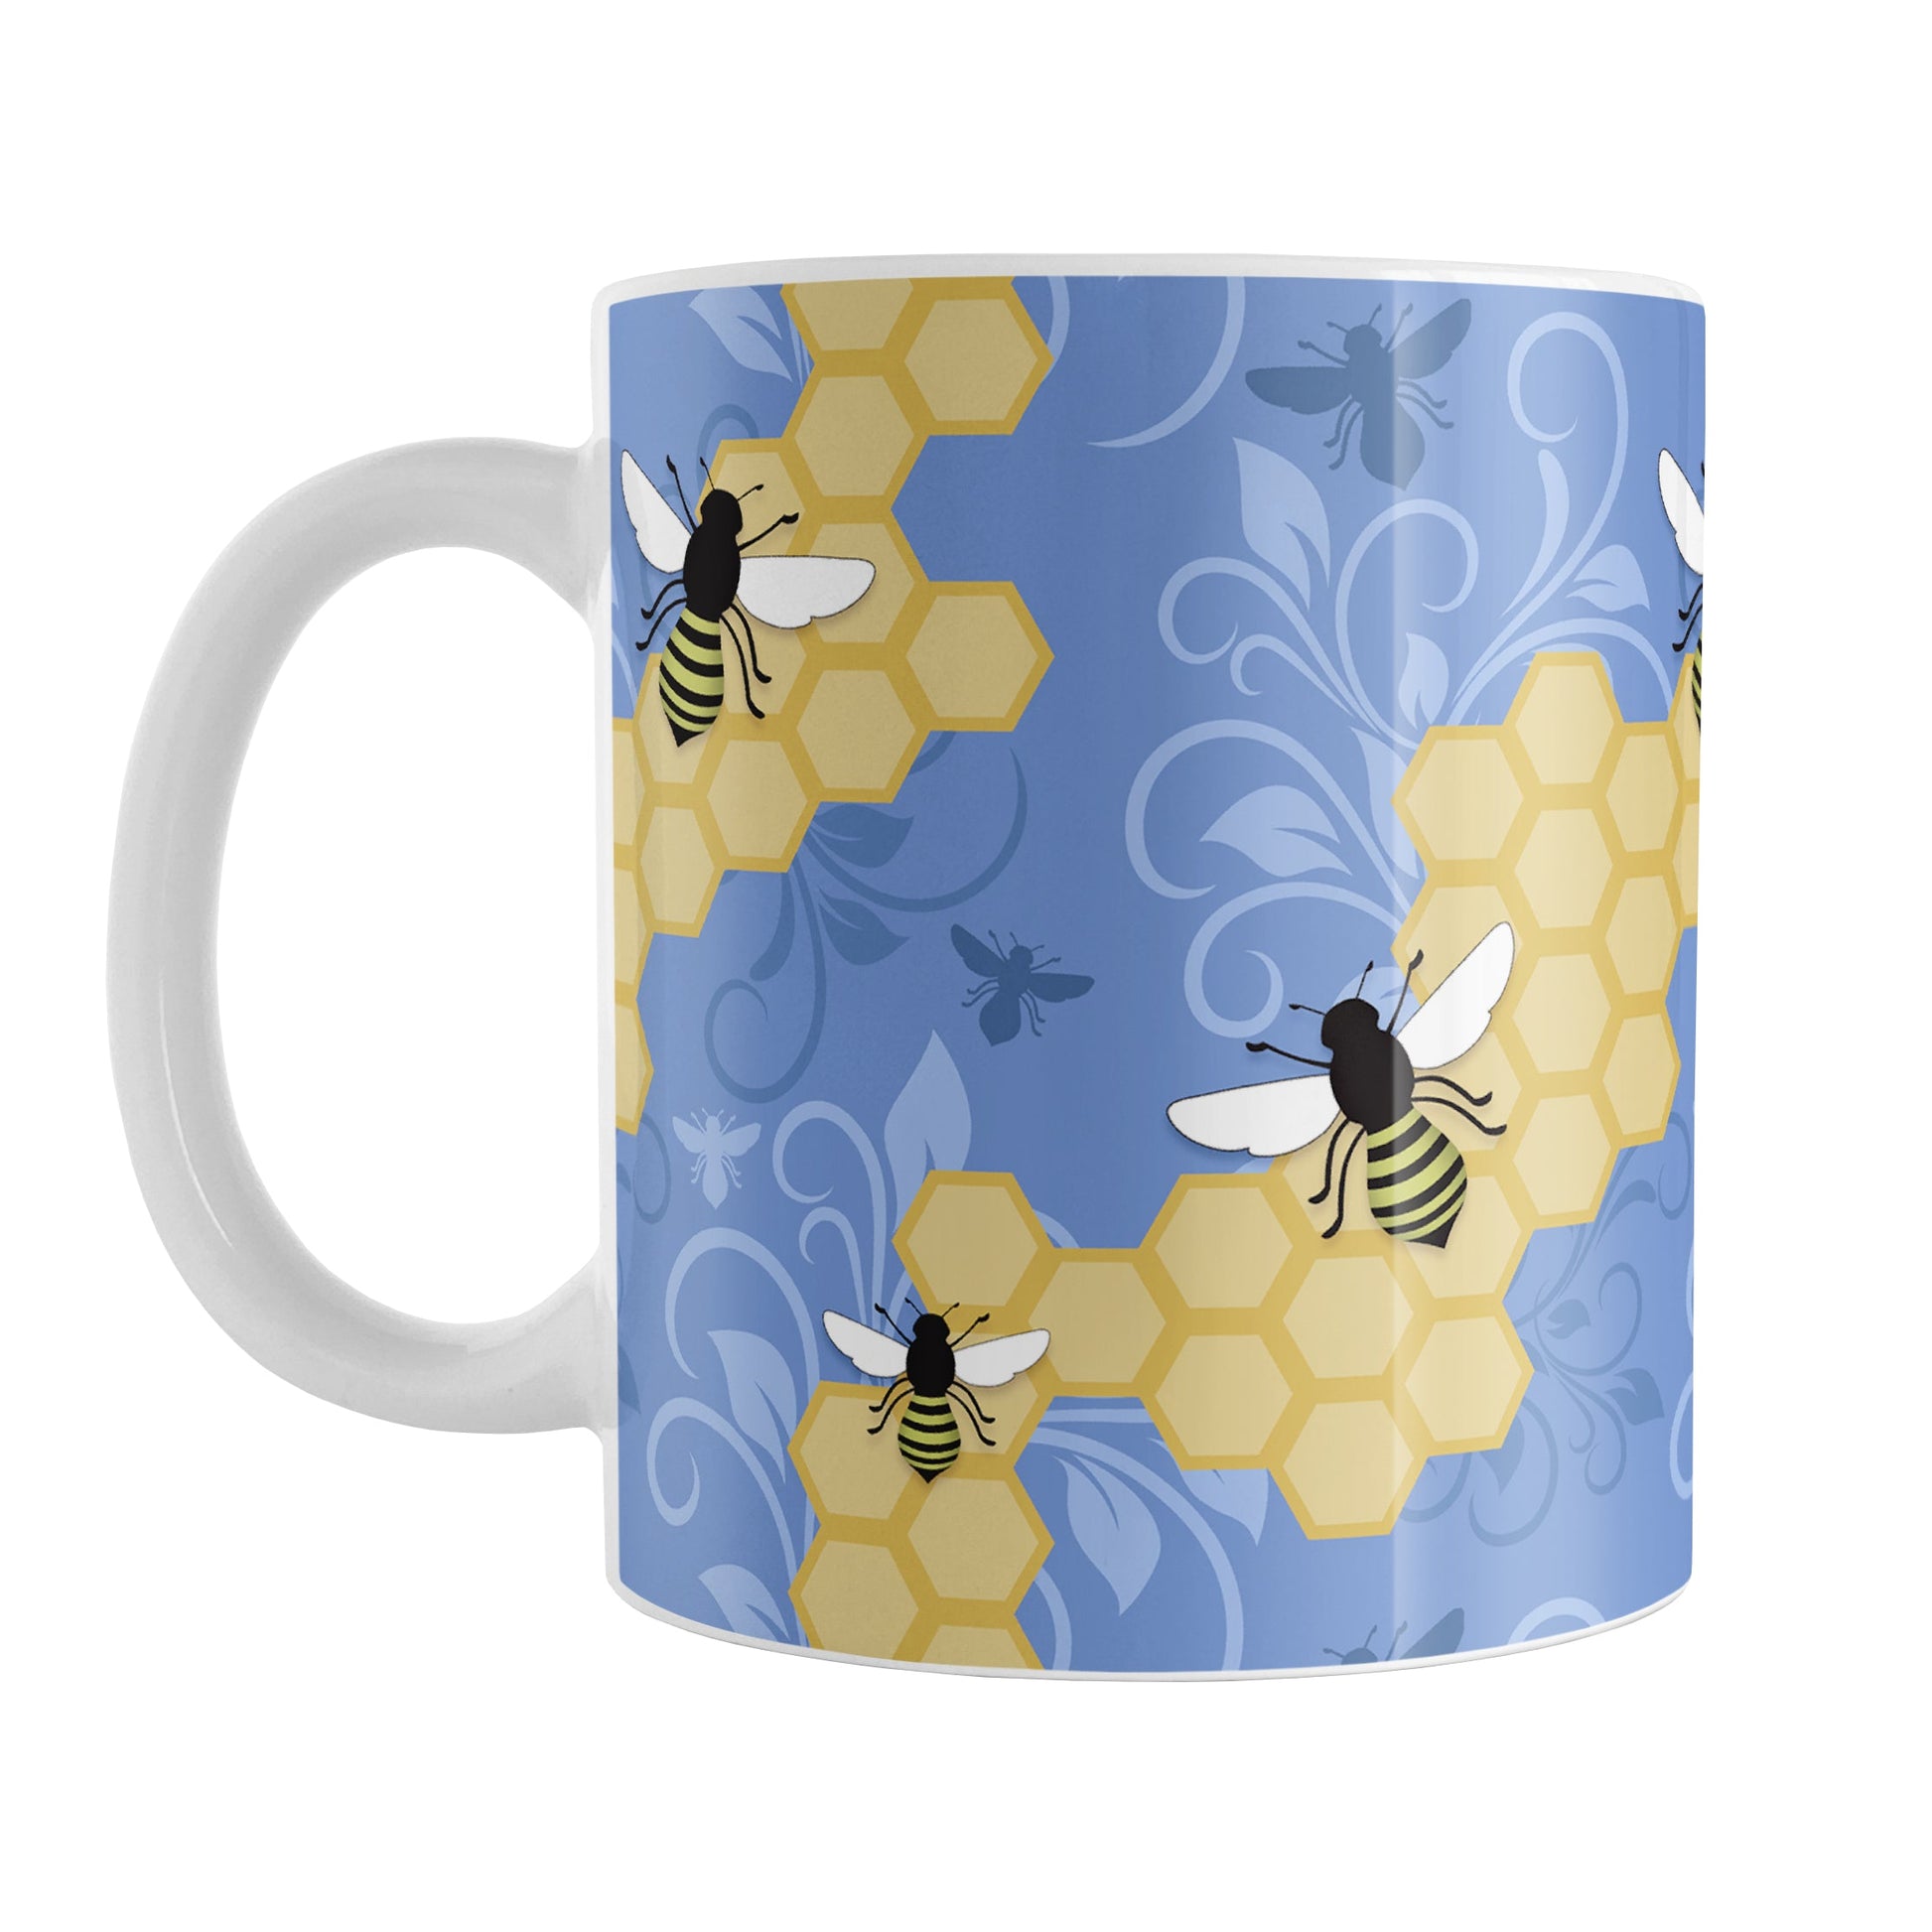 Blue Honeycomb Bee Mug (11oz) at Amy's Coffee Mugs. A ceramic coffee mug designed with a pattern of black and yellow bees on honeycomb lines over a blue flourish background that wraps around the mug to the handle.